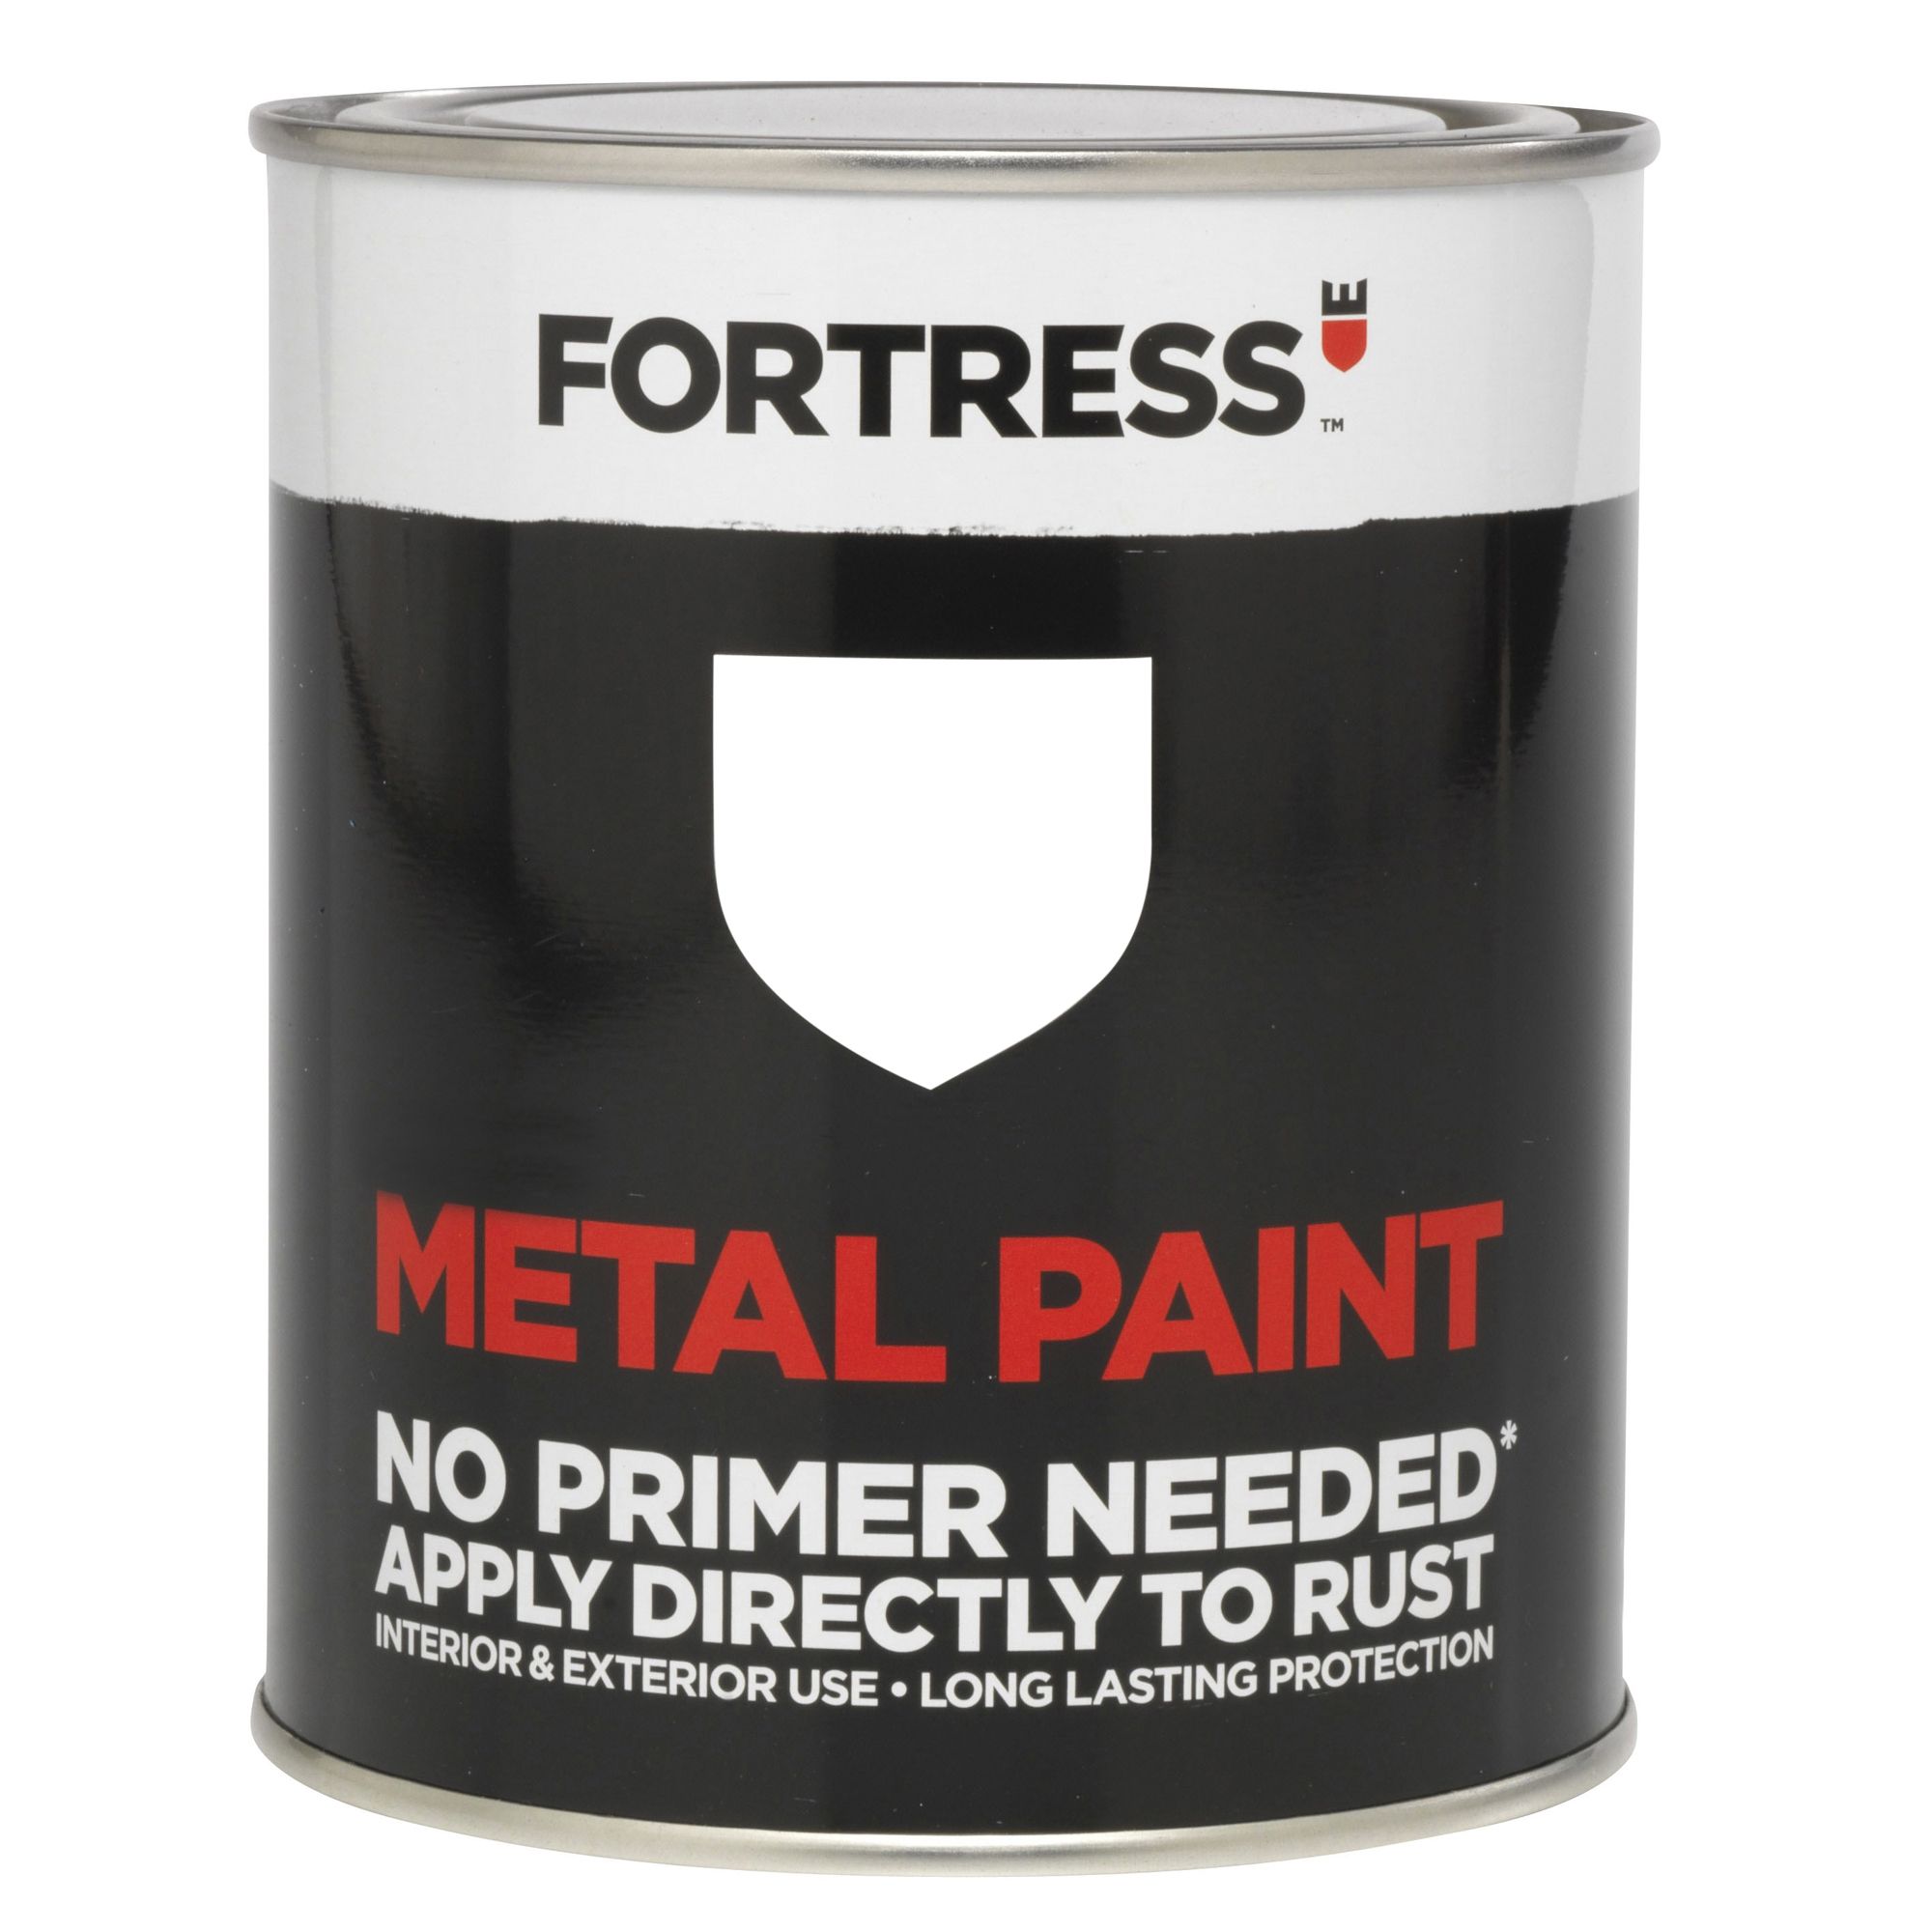 Fortress White Gloss Metal Paint, 0.75L